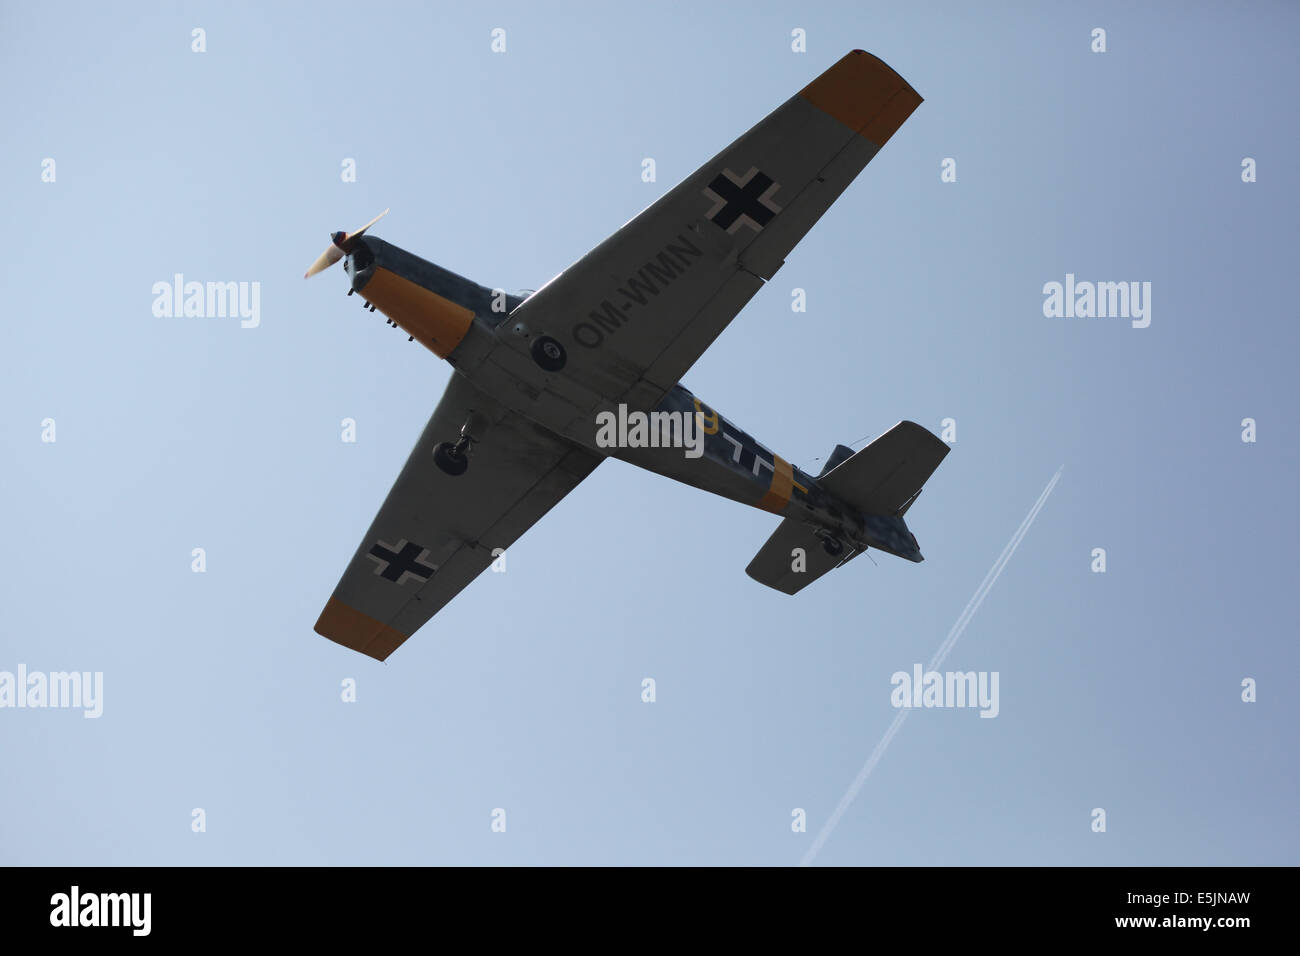 Zlin 226MS aircraft painted in colors of German Luftwaffe. Stock Photo